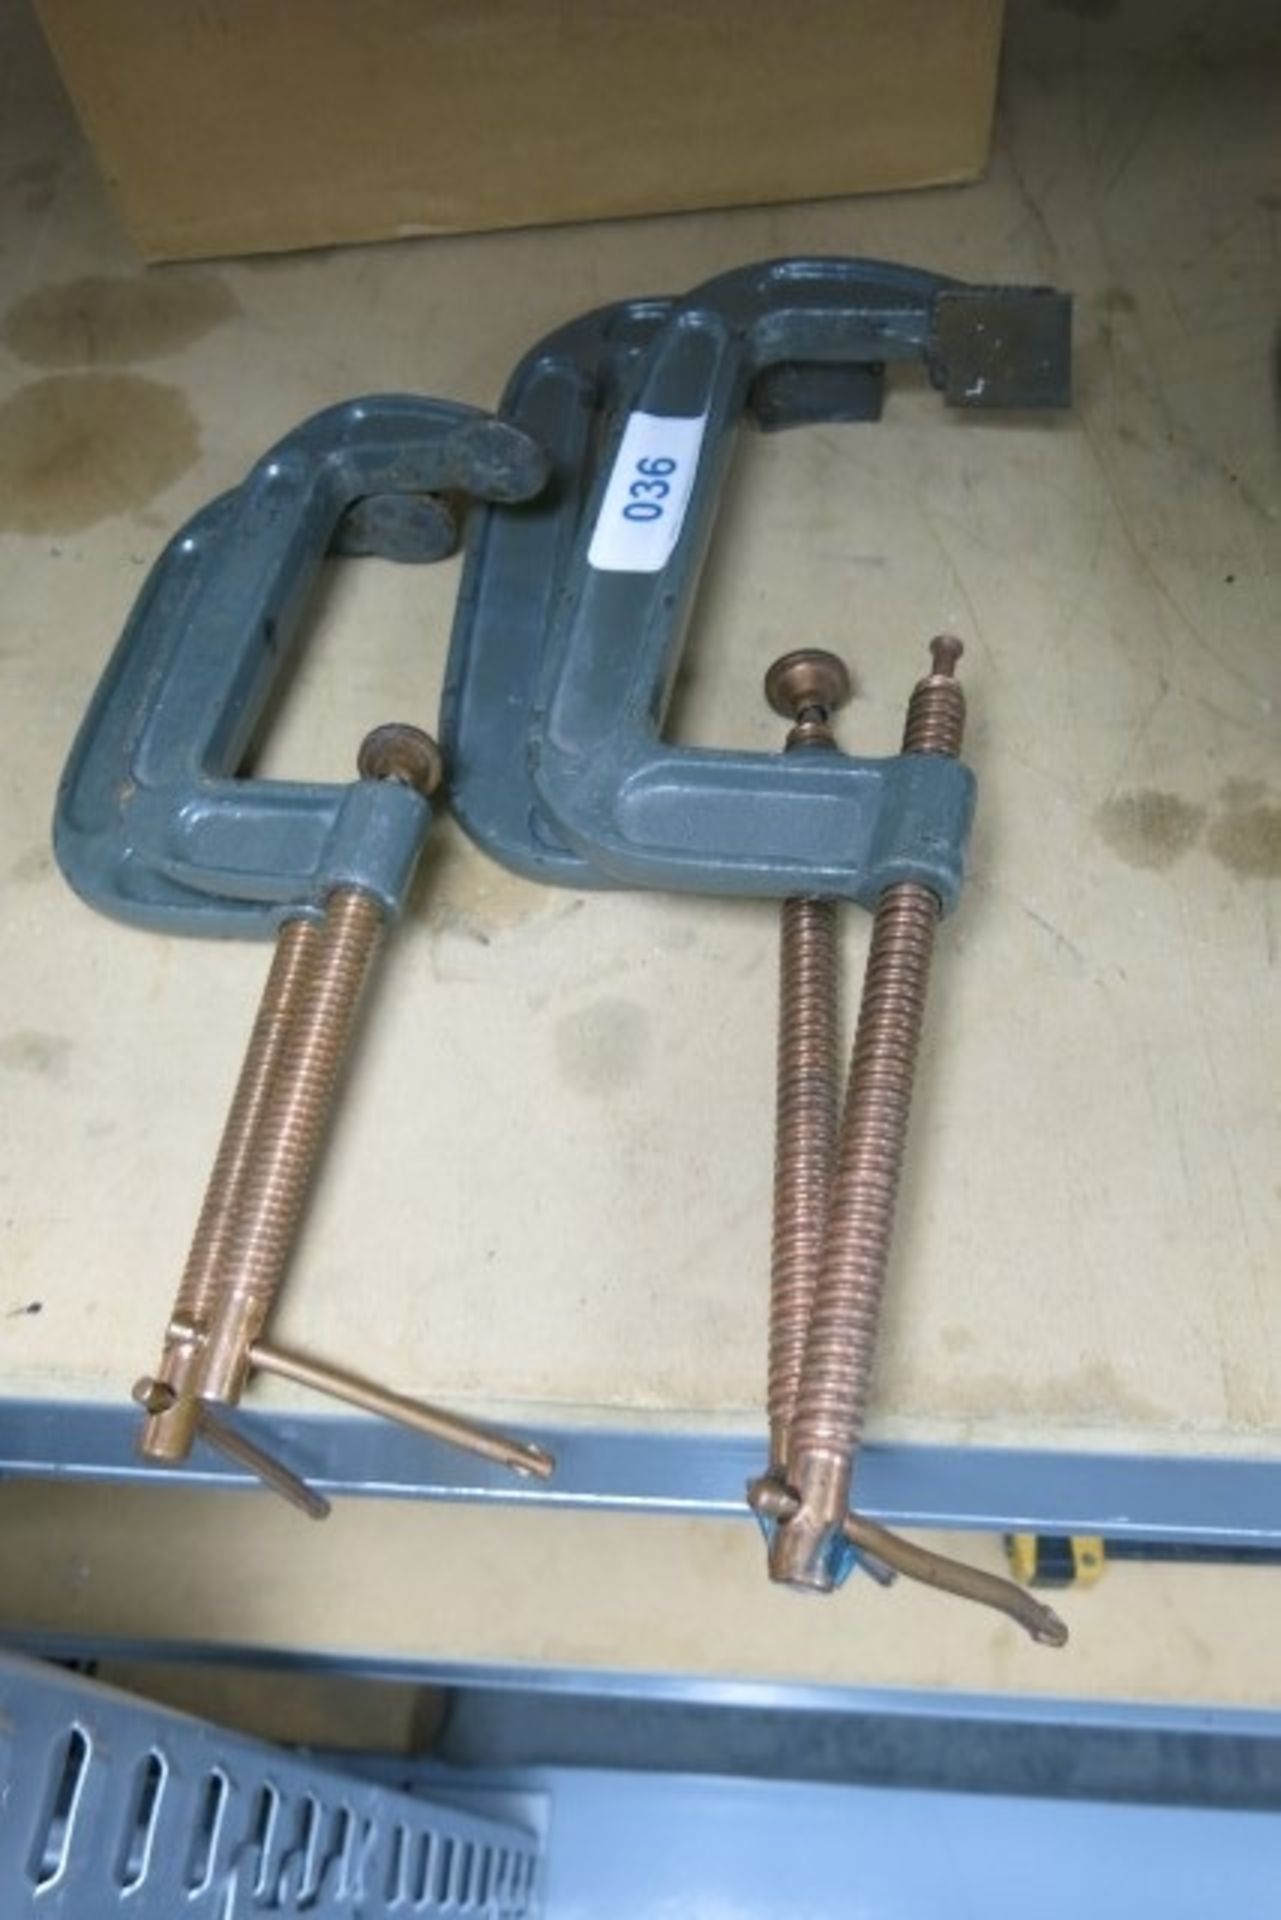 (2) 6" G-clamps and (2) 4" G-clamps